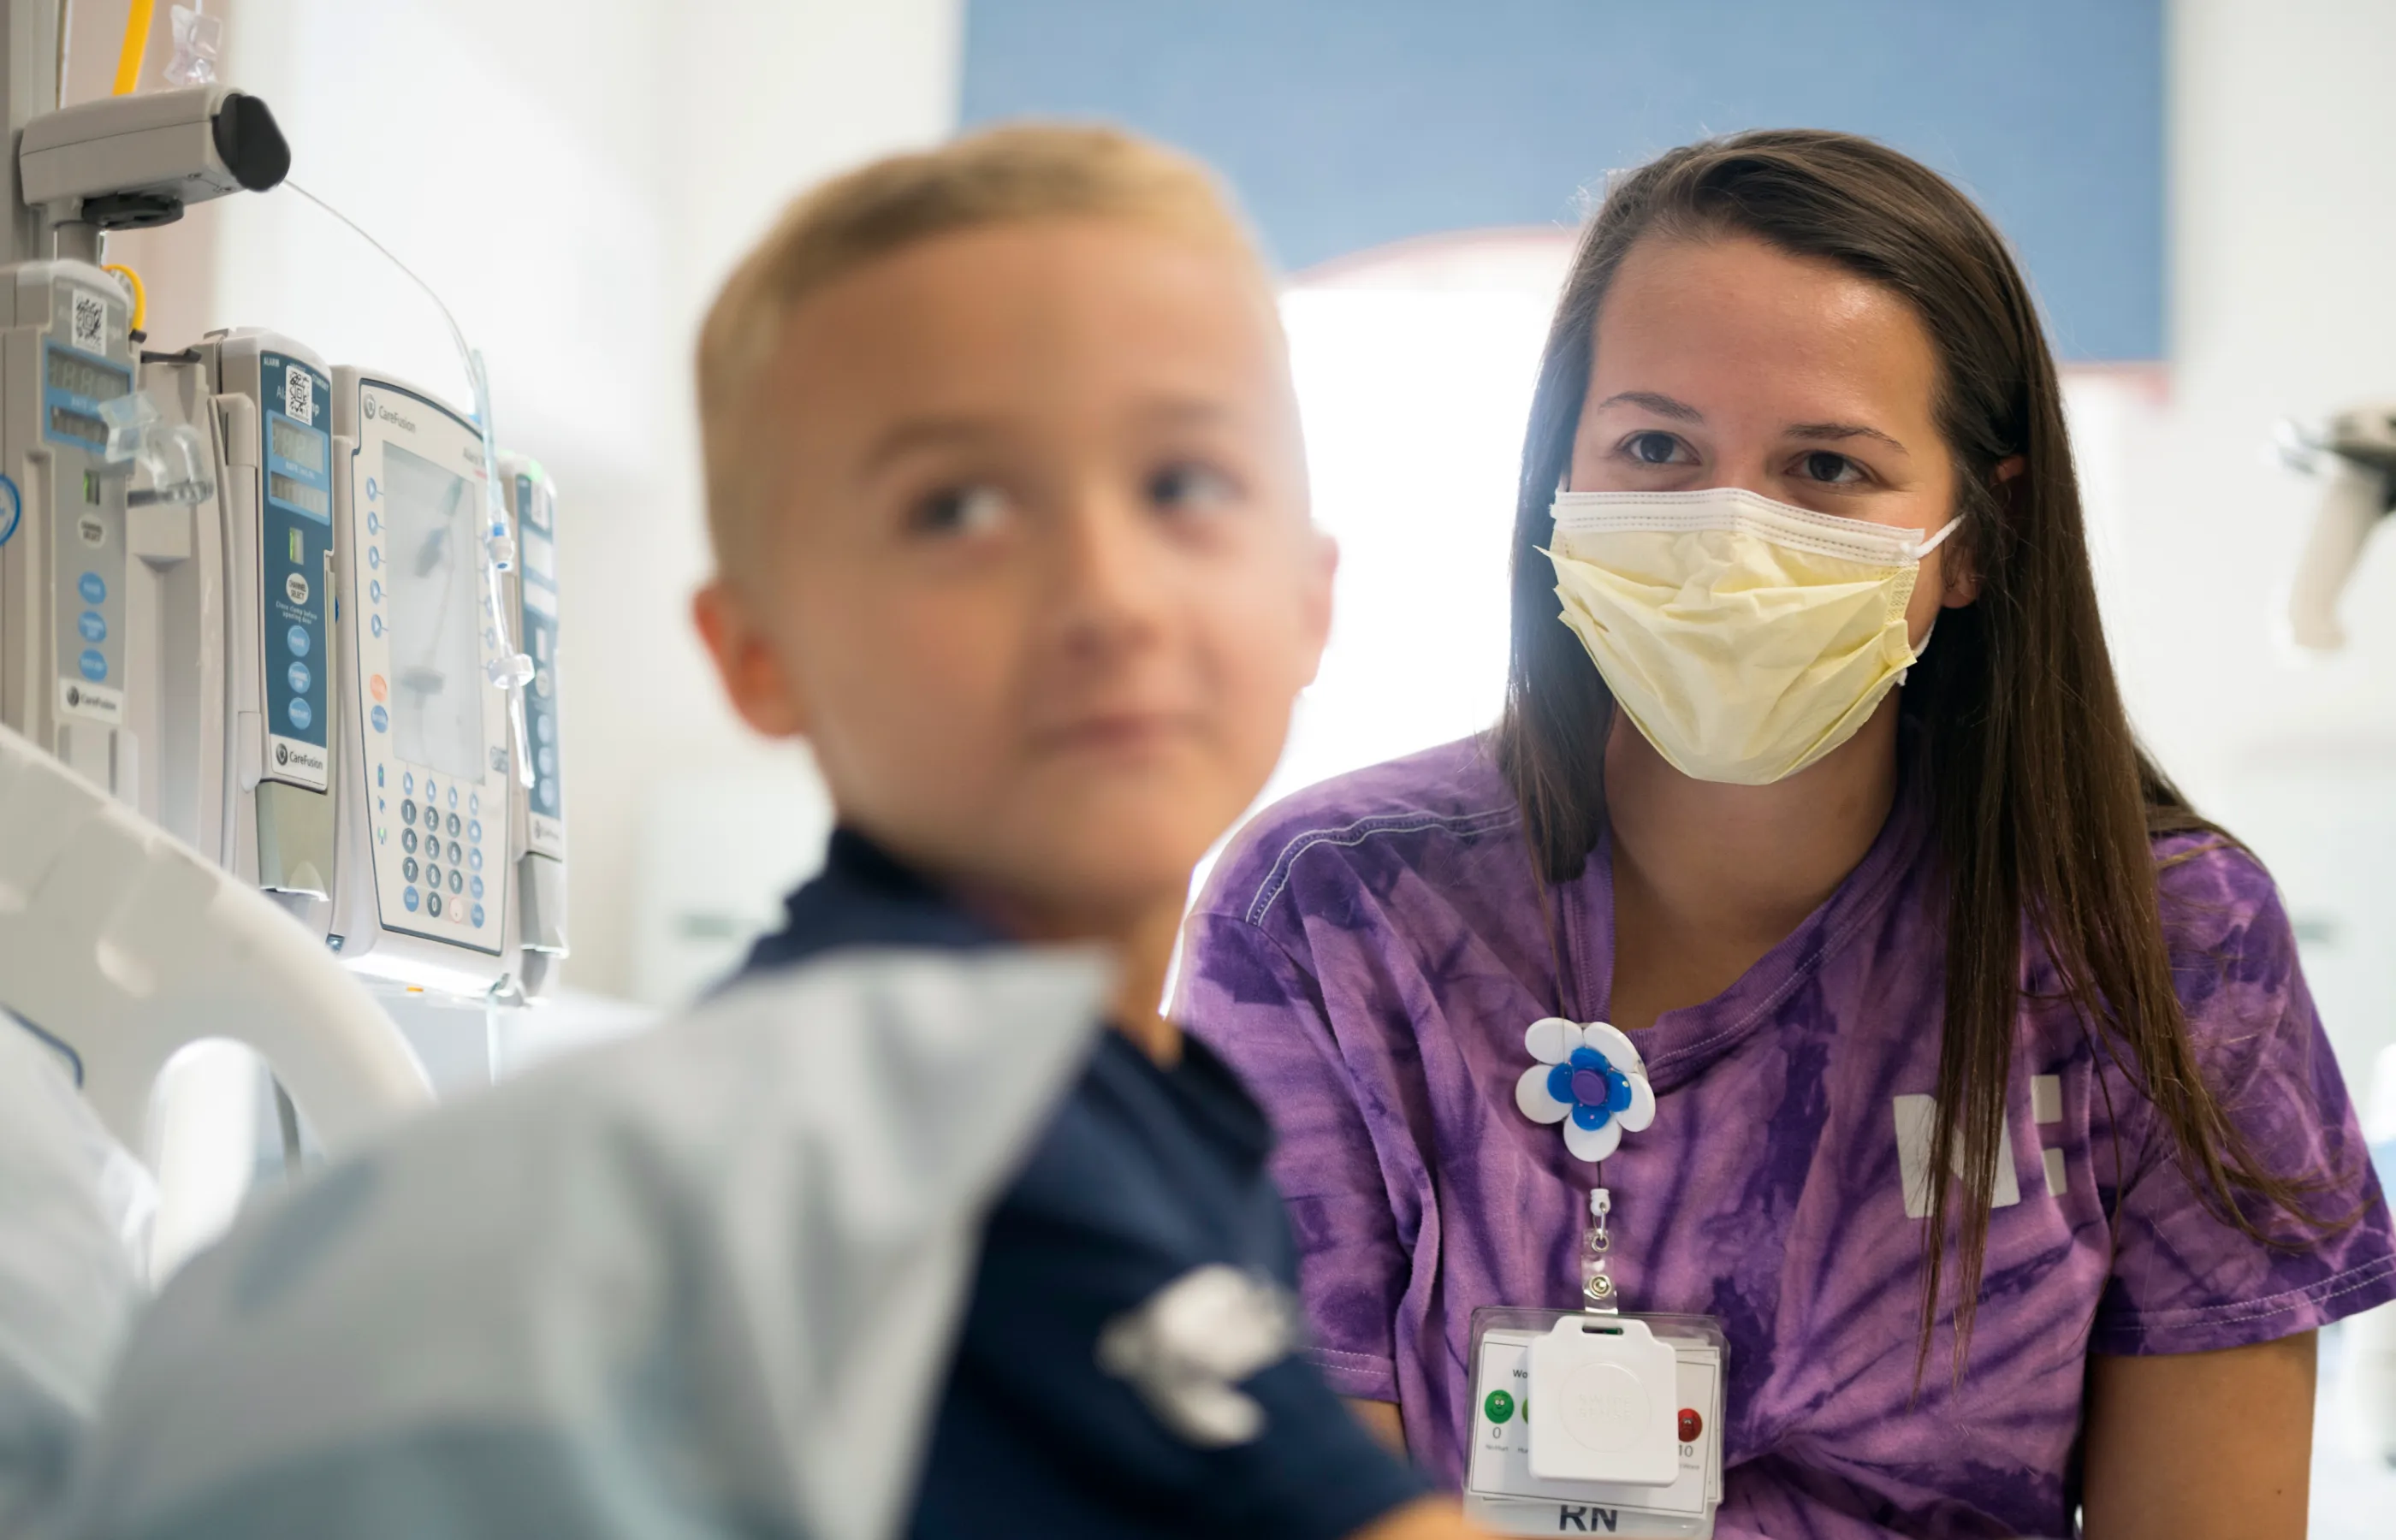 A masked RN smiles at a young boy in a pediatric hospital room